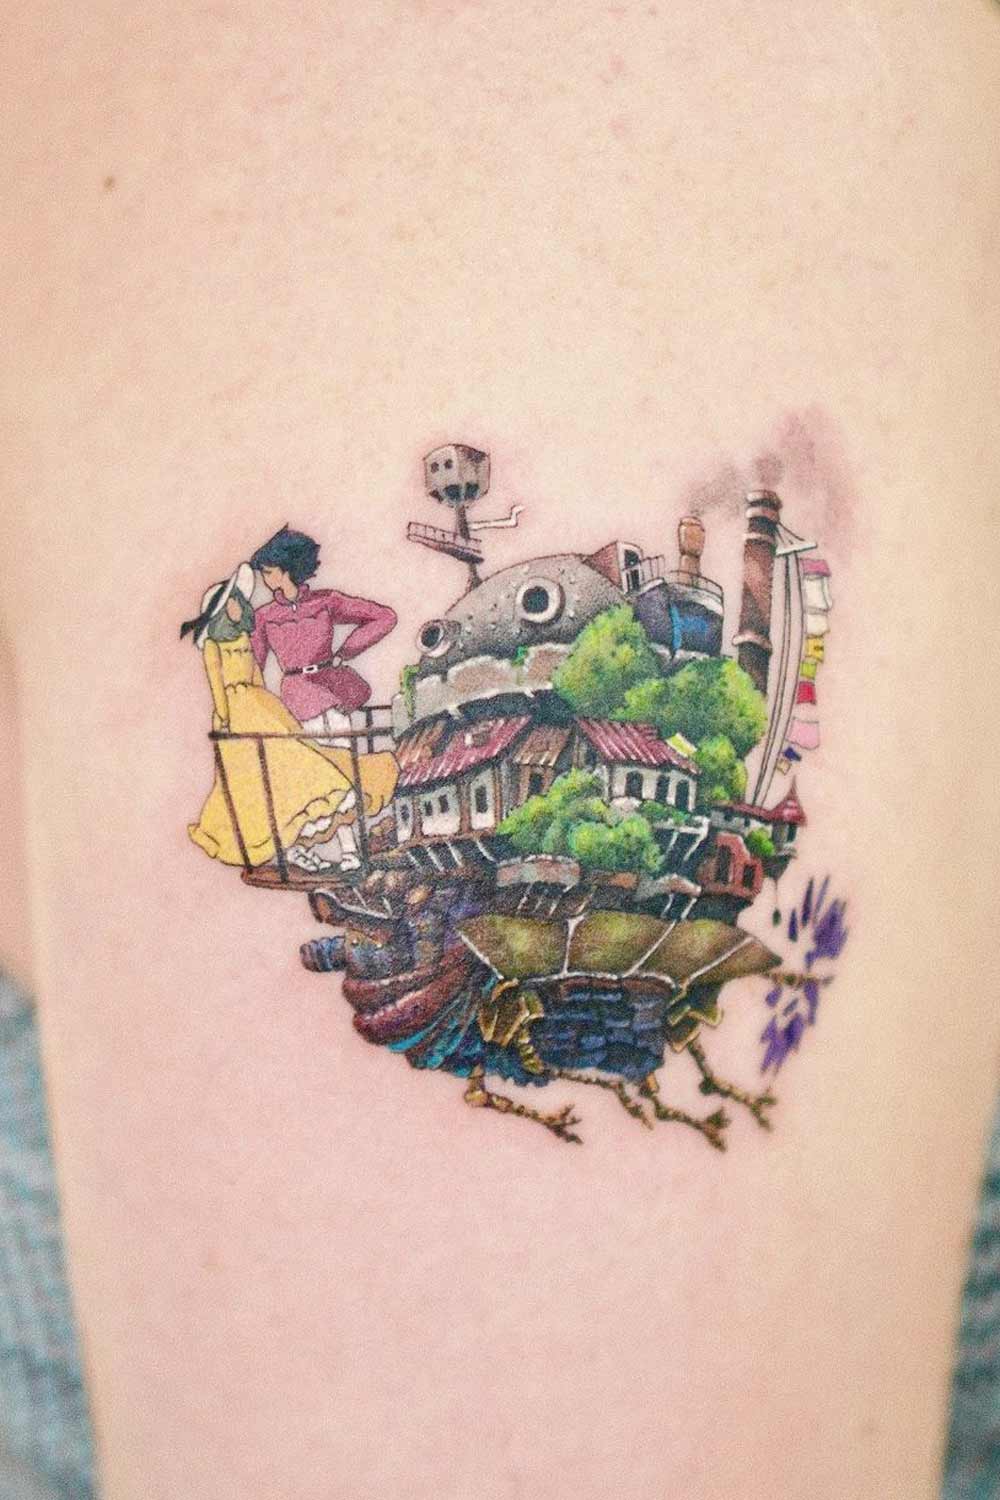 Howl's Moving Castle Theme Tattoo Ideas